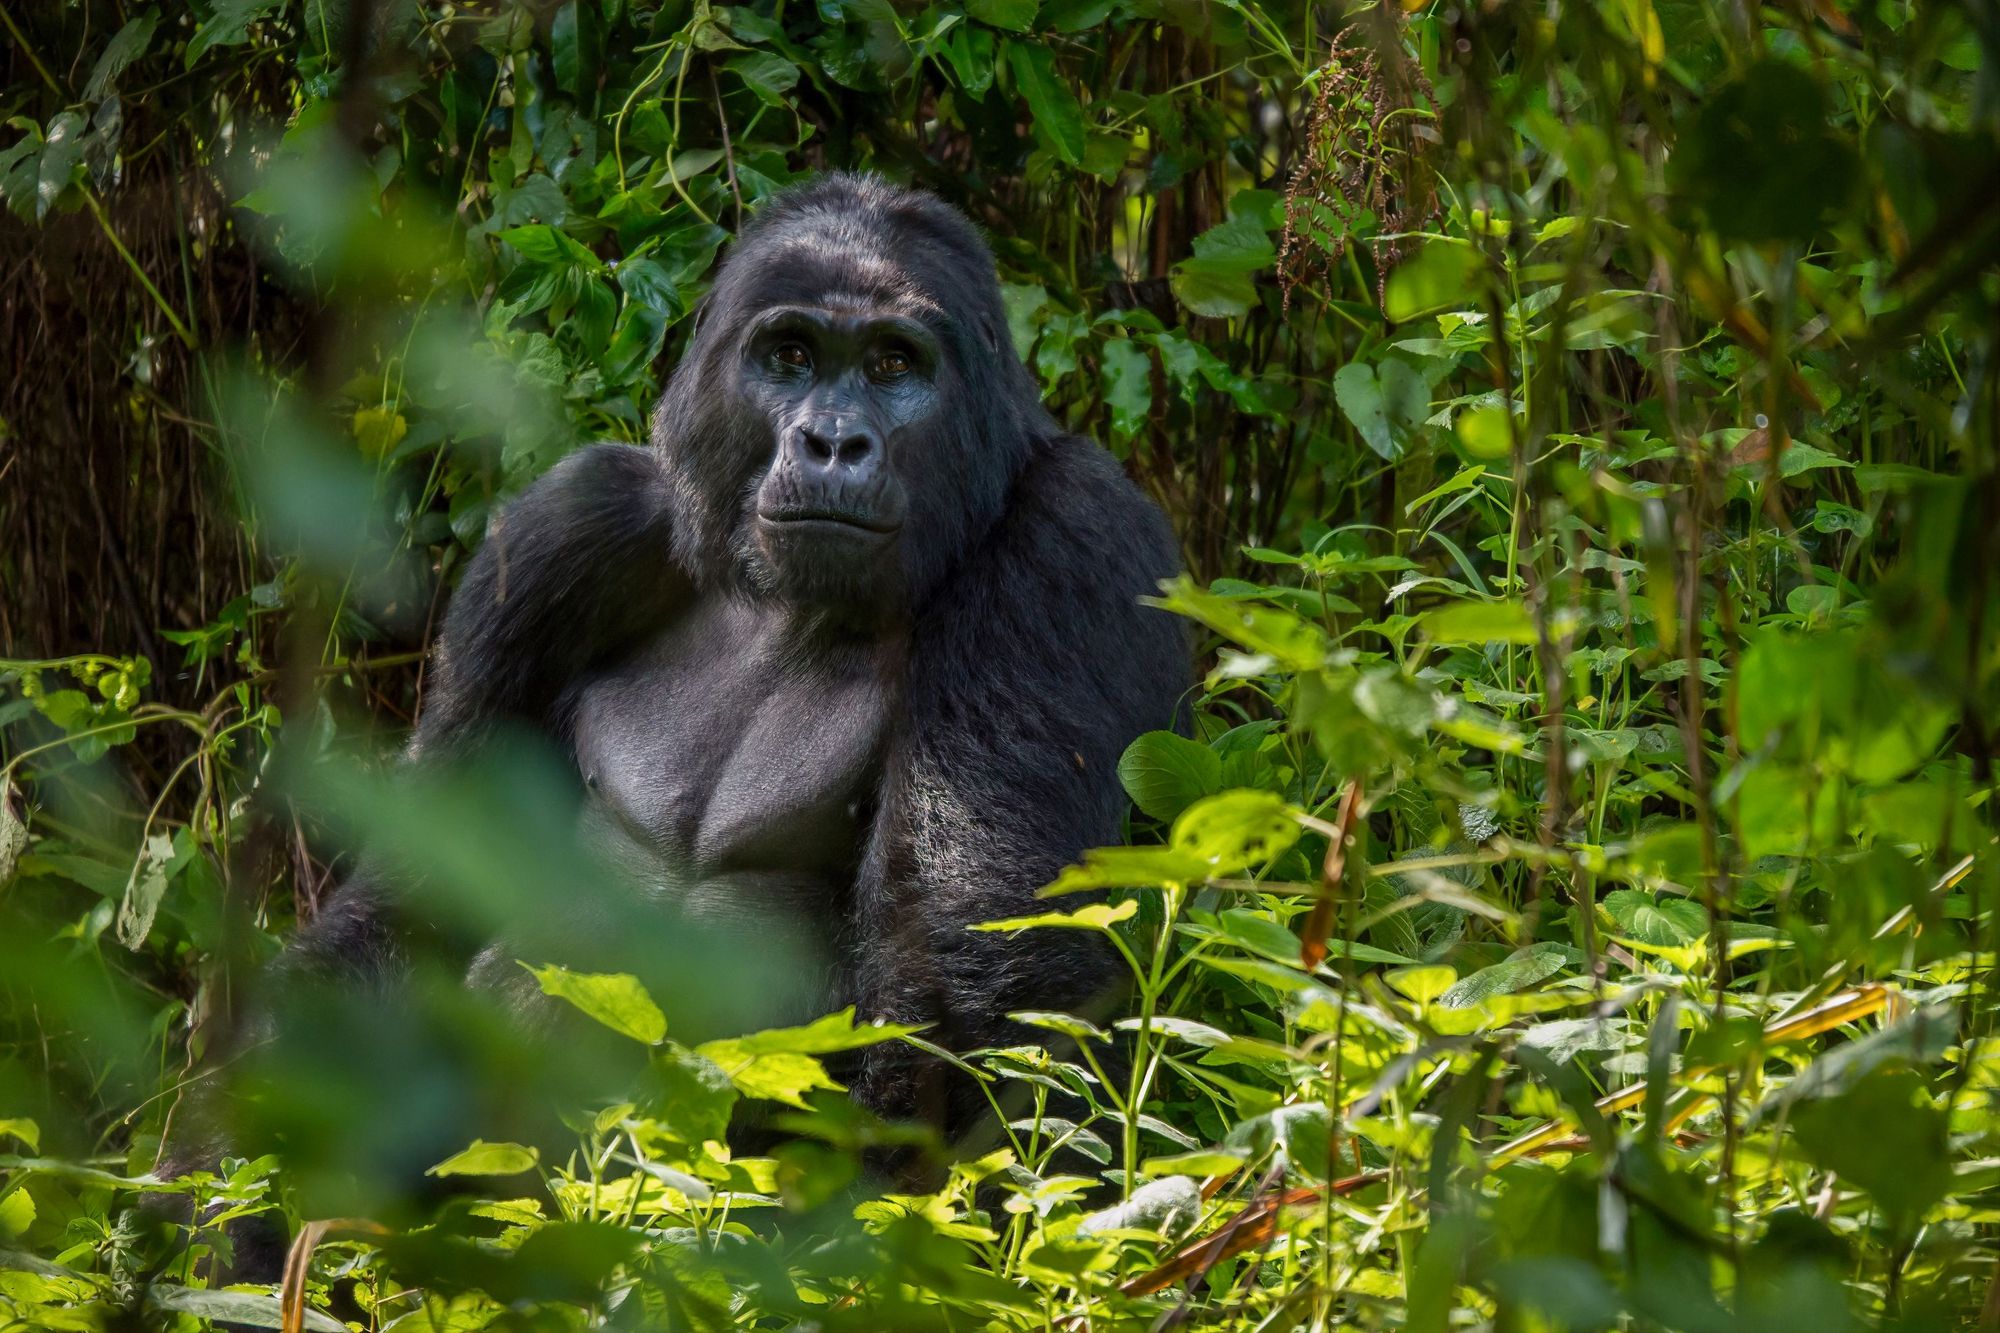 A gorilla hidden about the vegetation of the lush Bwindi Impenetrable Forest. Photo: Getty